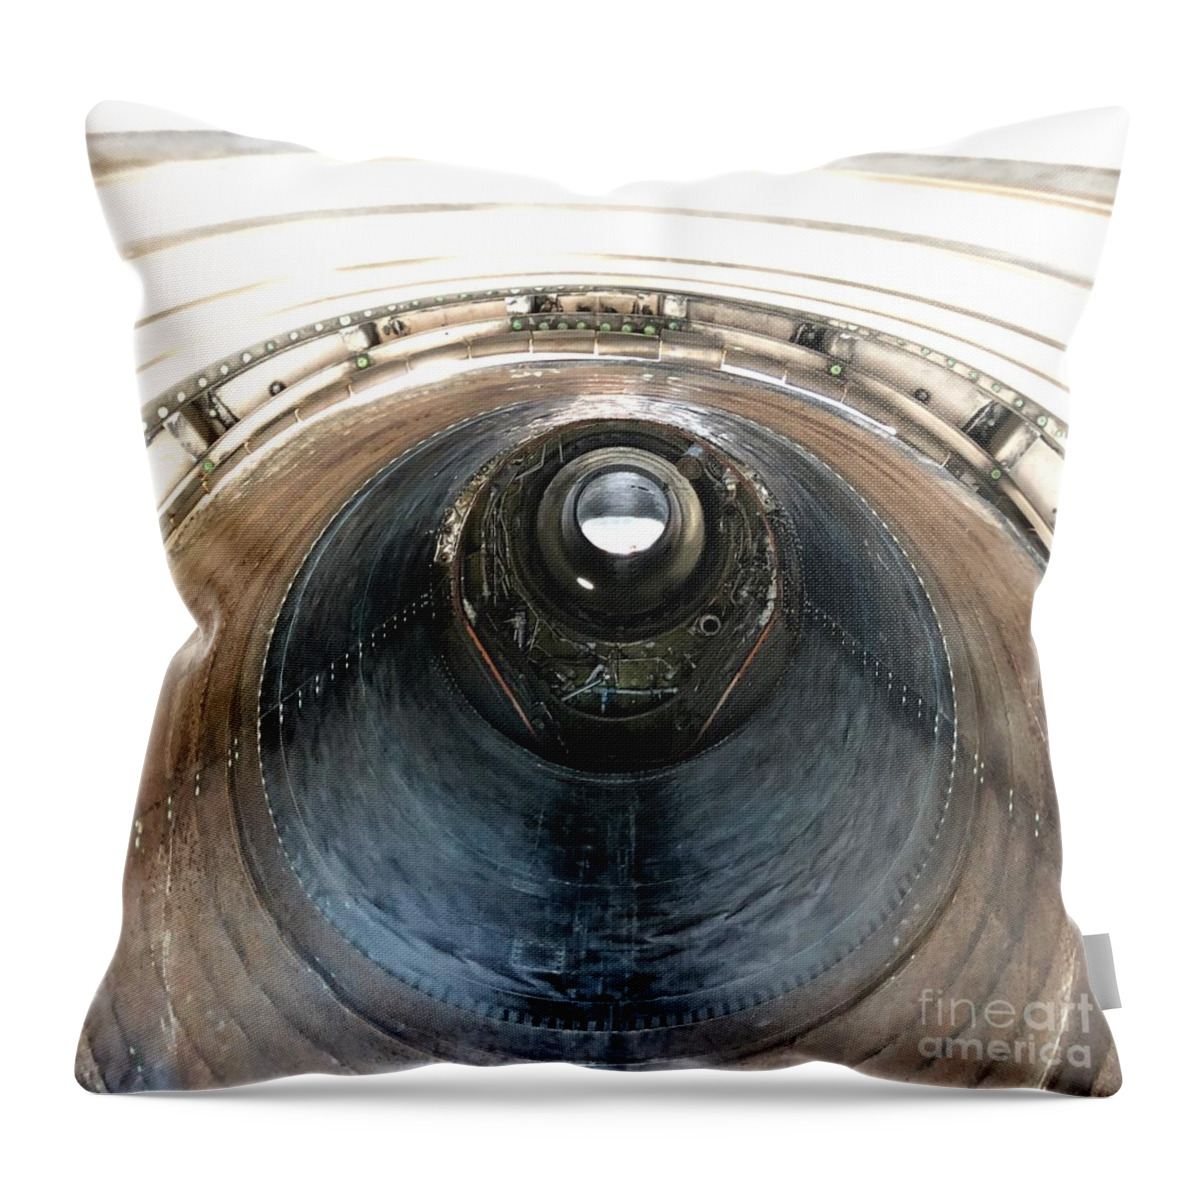 Tube Throw Pillow featuring the photograph Tube by Flavia Westerwelle